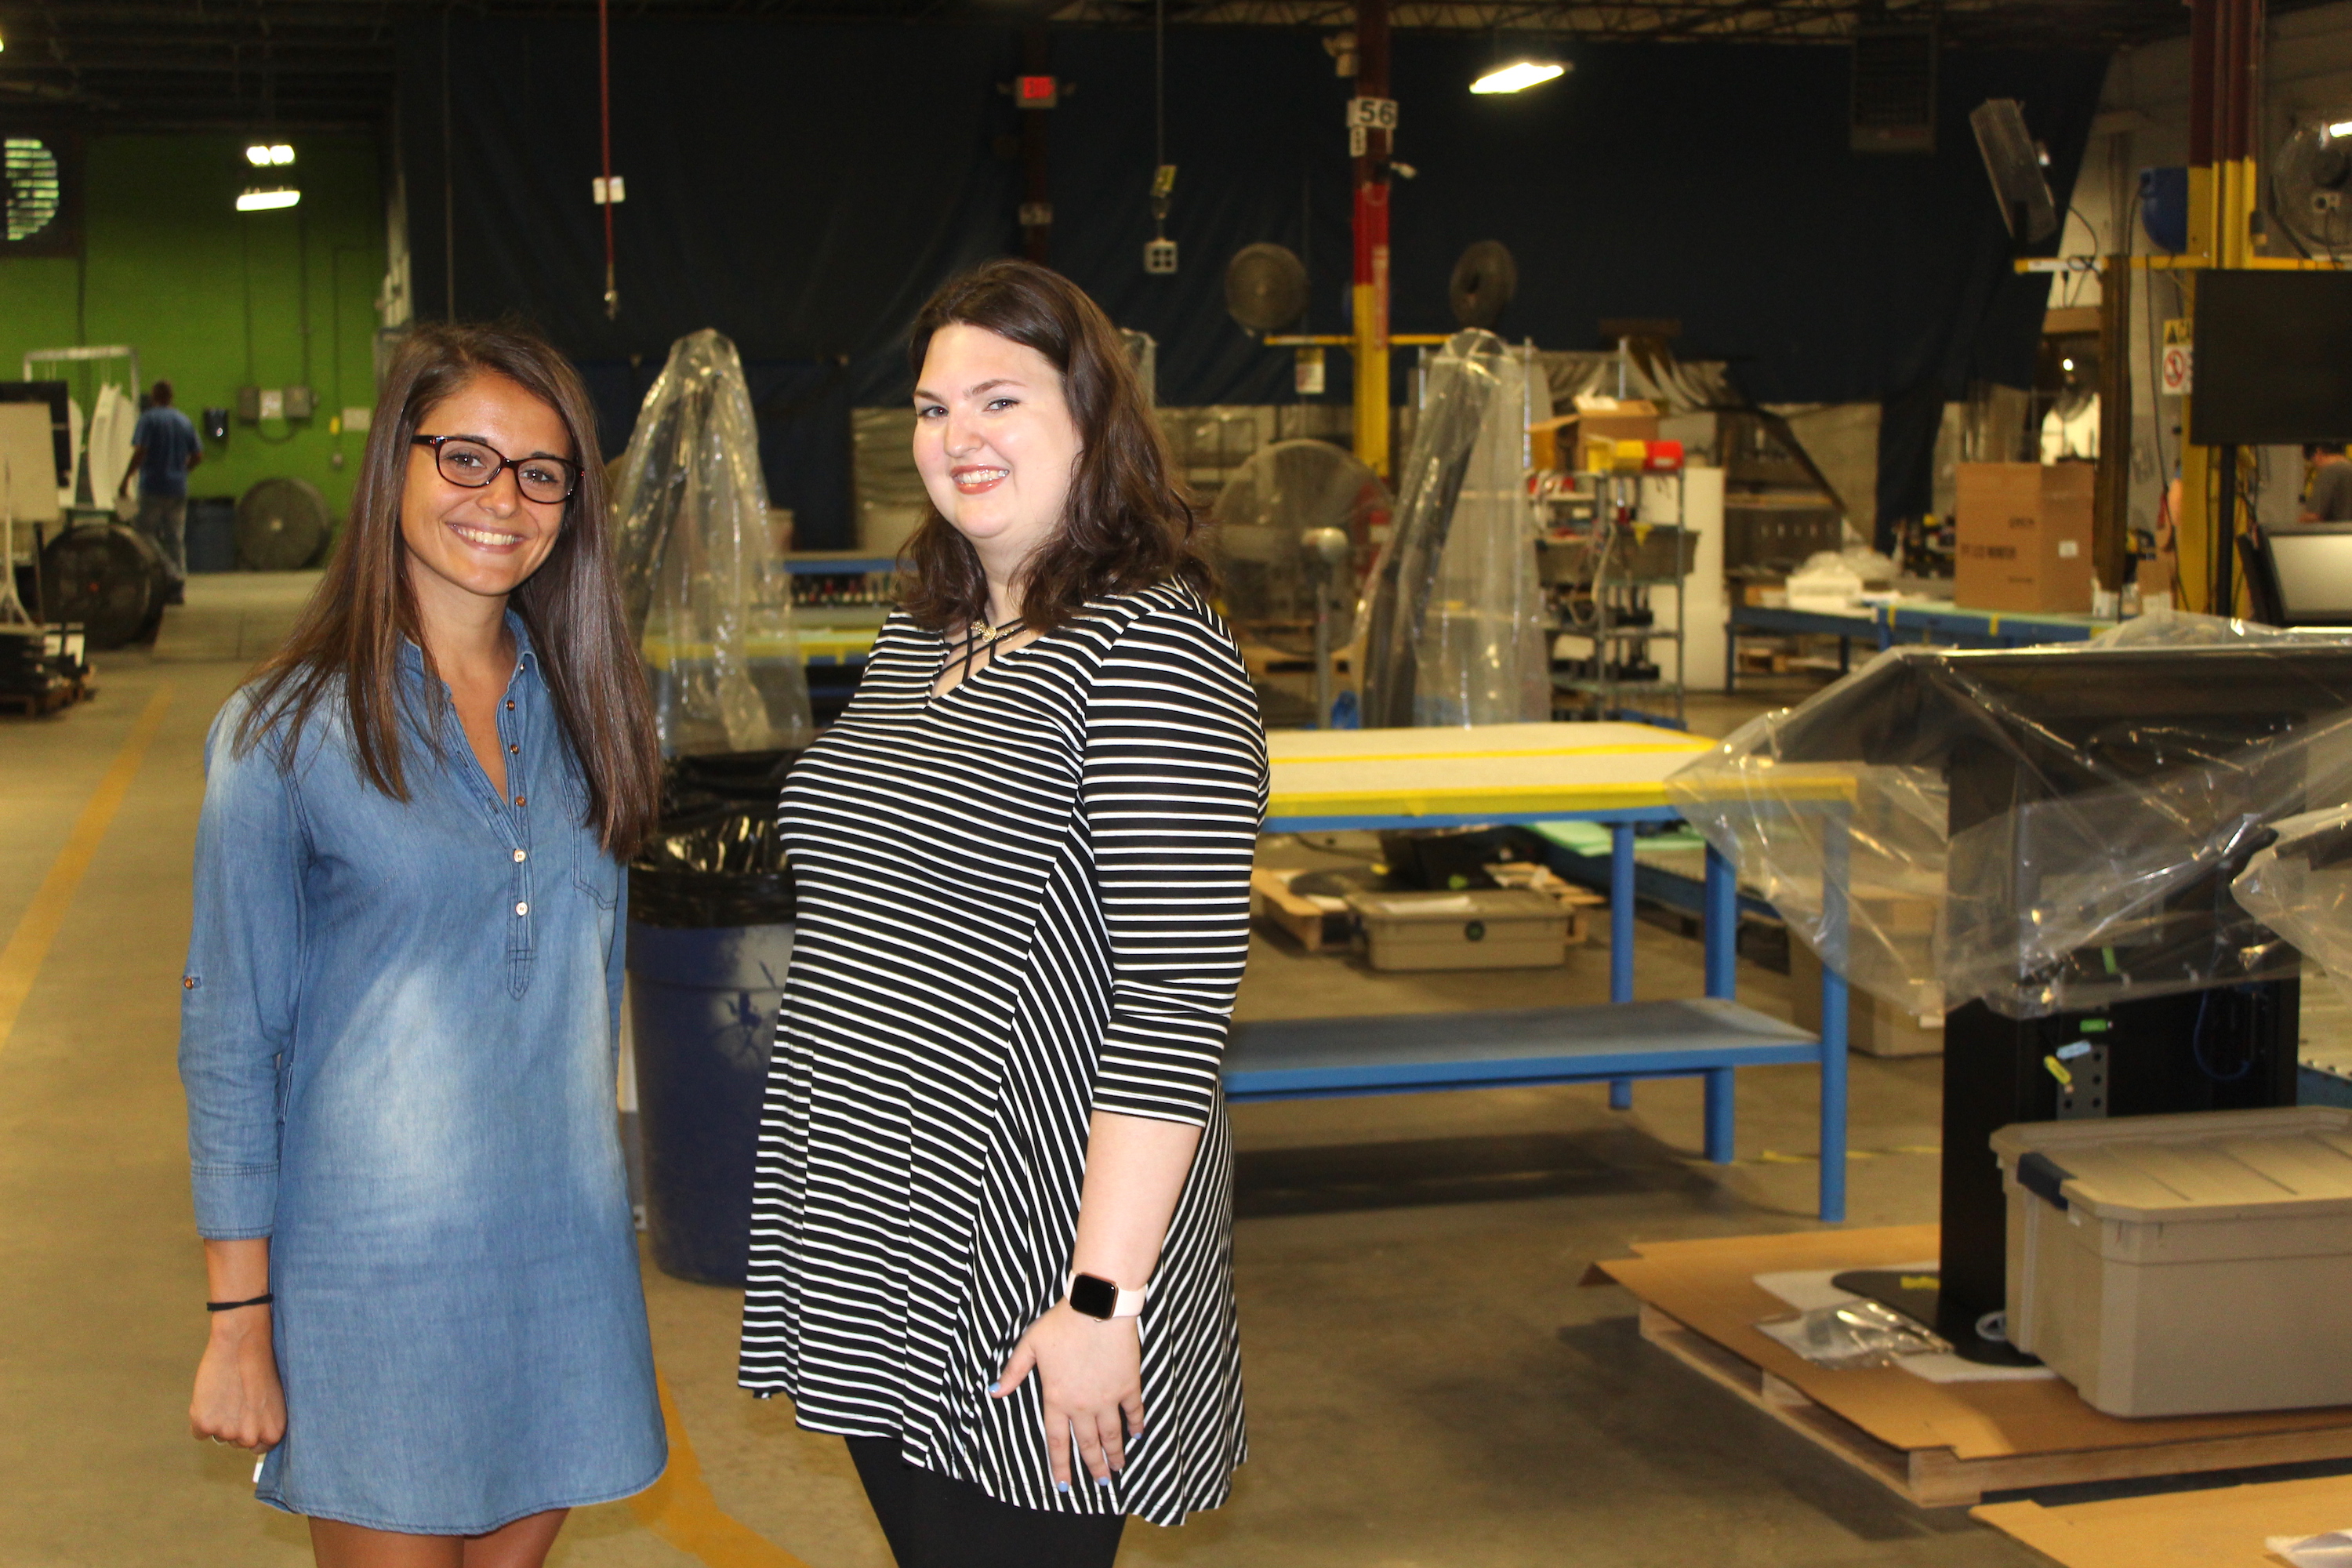 Melissa Tally, Meridian's Marketing Coordinator, and Lily Blake tour the Meridian assembly floor.